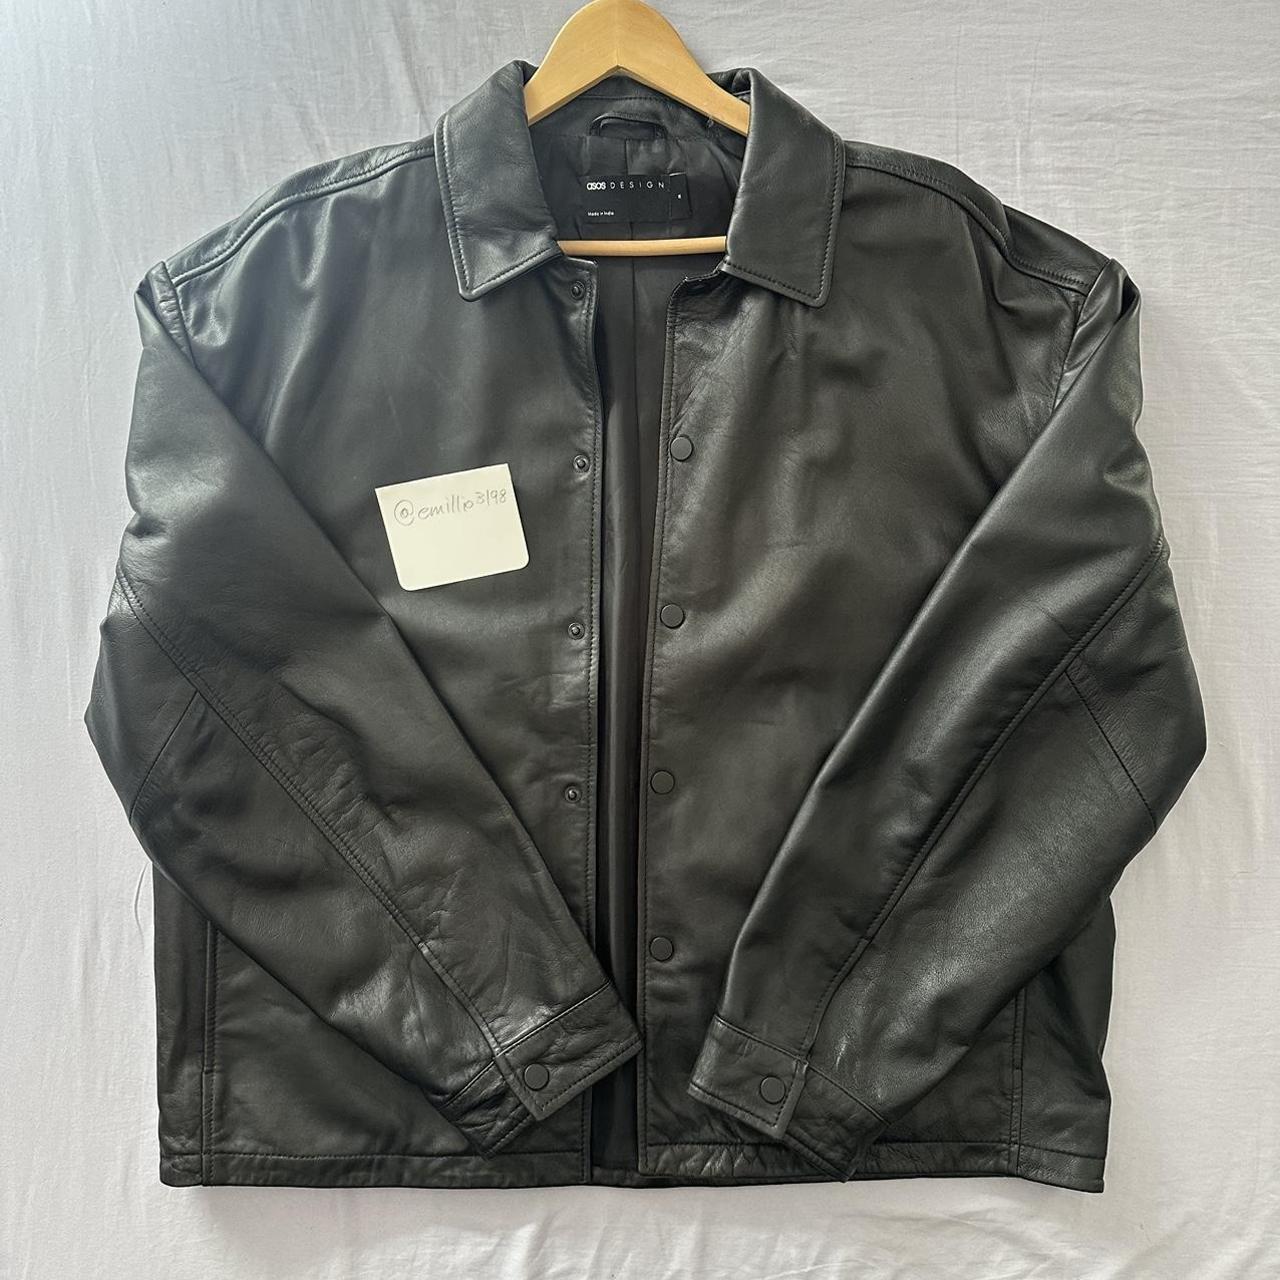 100% Leather Jacket Open to offers, price negotiable :) - Depop